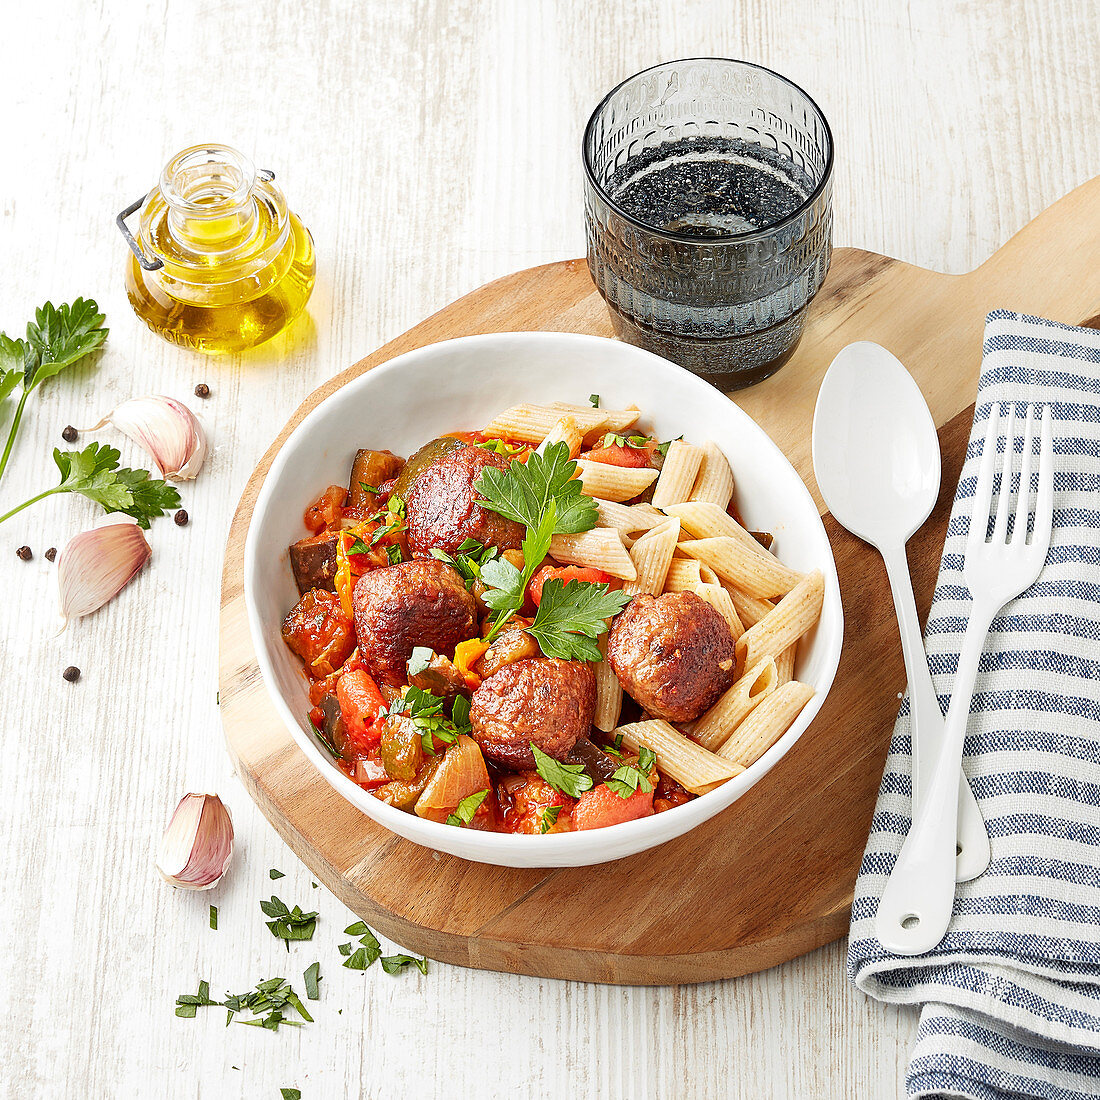 Meatballs with penne pasta and ratatouille